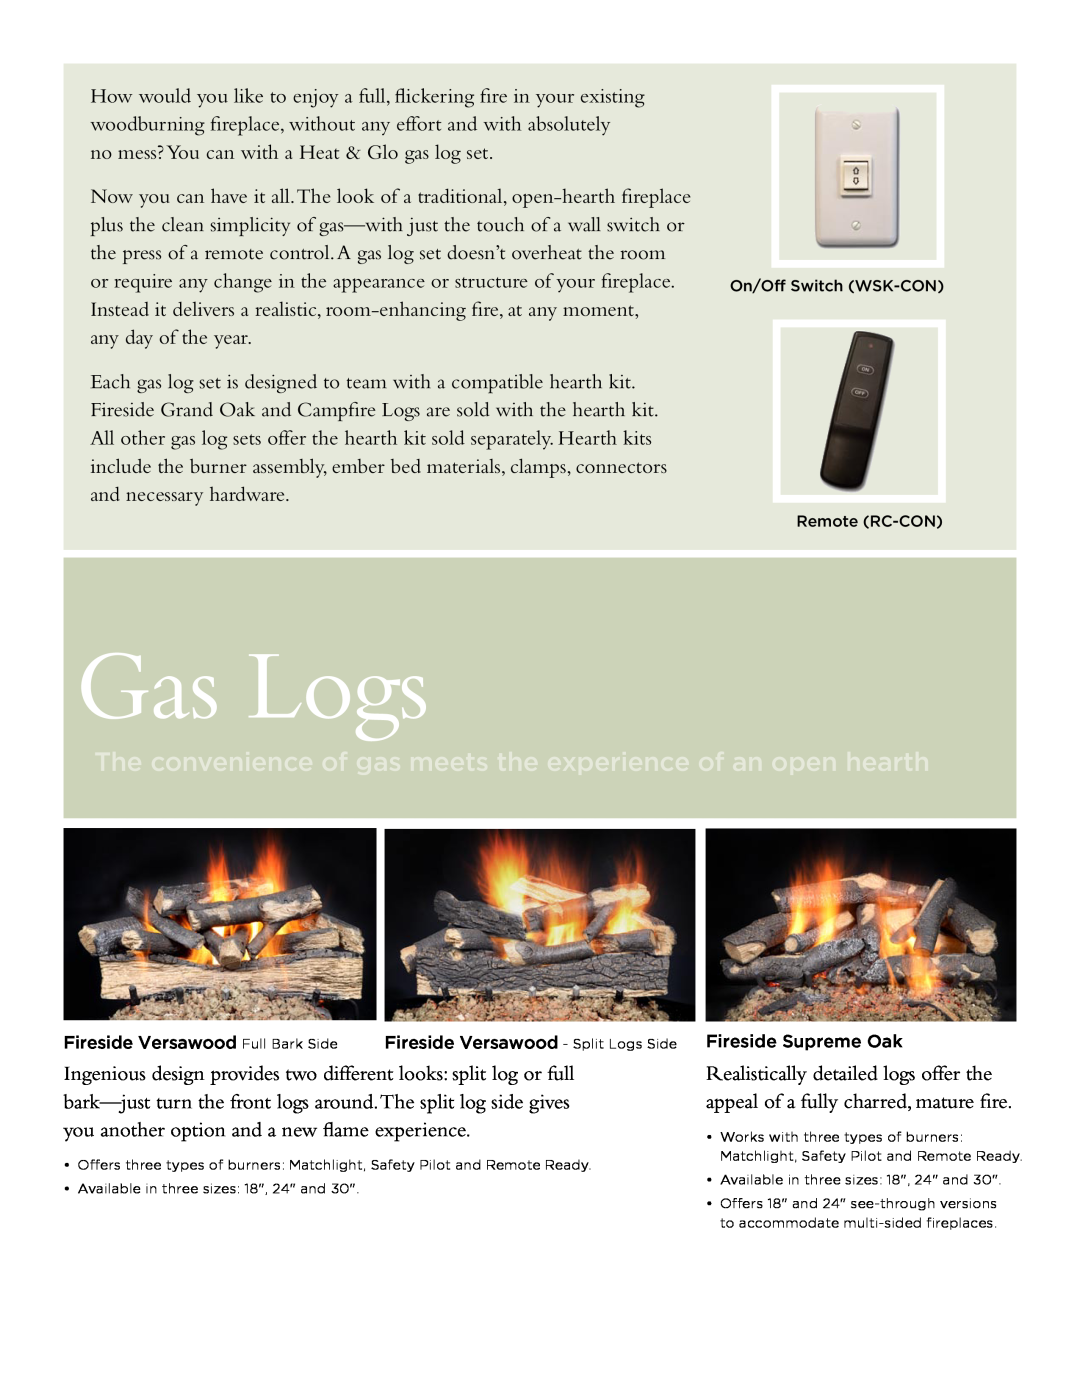 Hearth and Home Technologies Gas Logs manual The convenience of gas meets the experience of an open hearth 